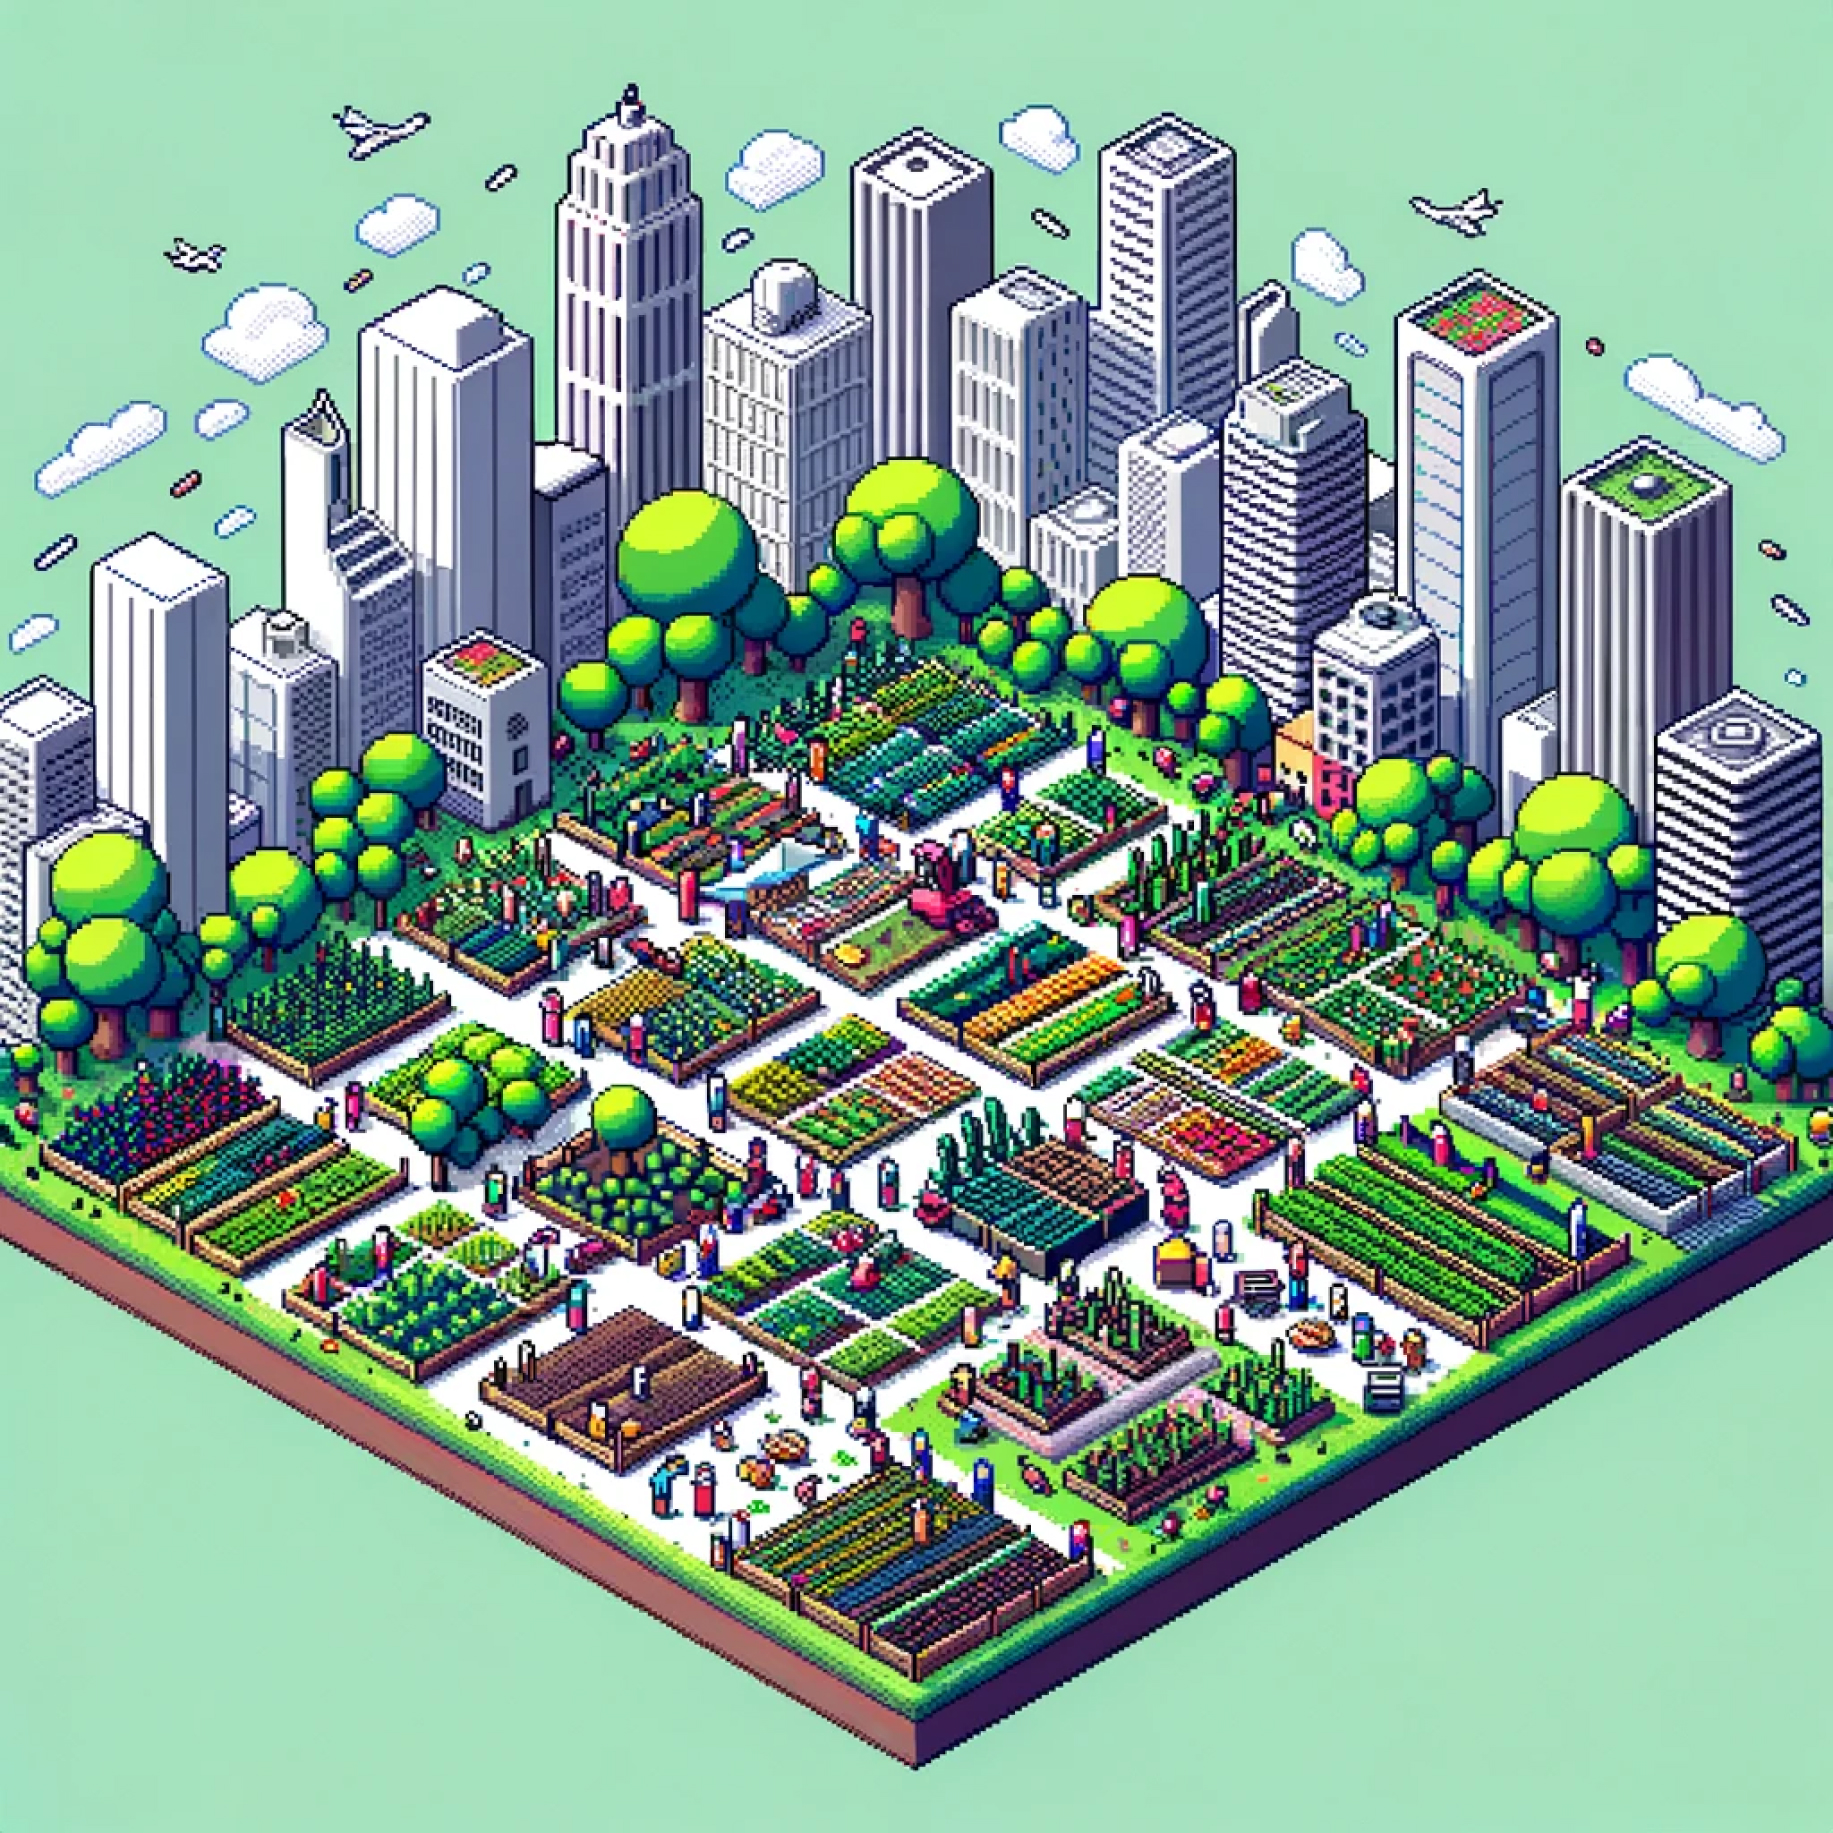 A retro video game impression of inner-city agriculture in Melbourne